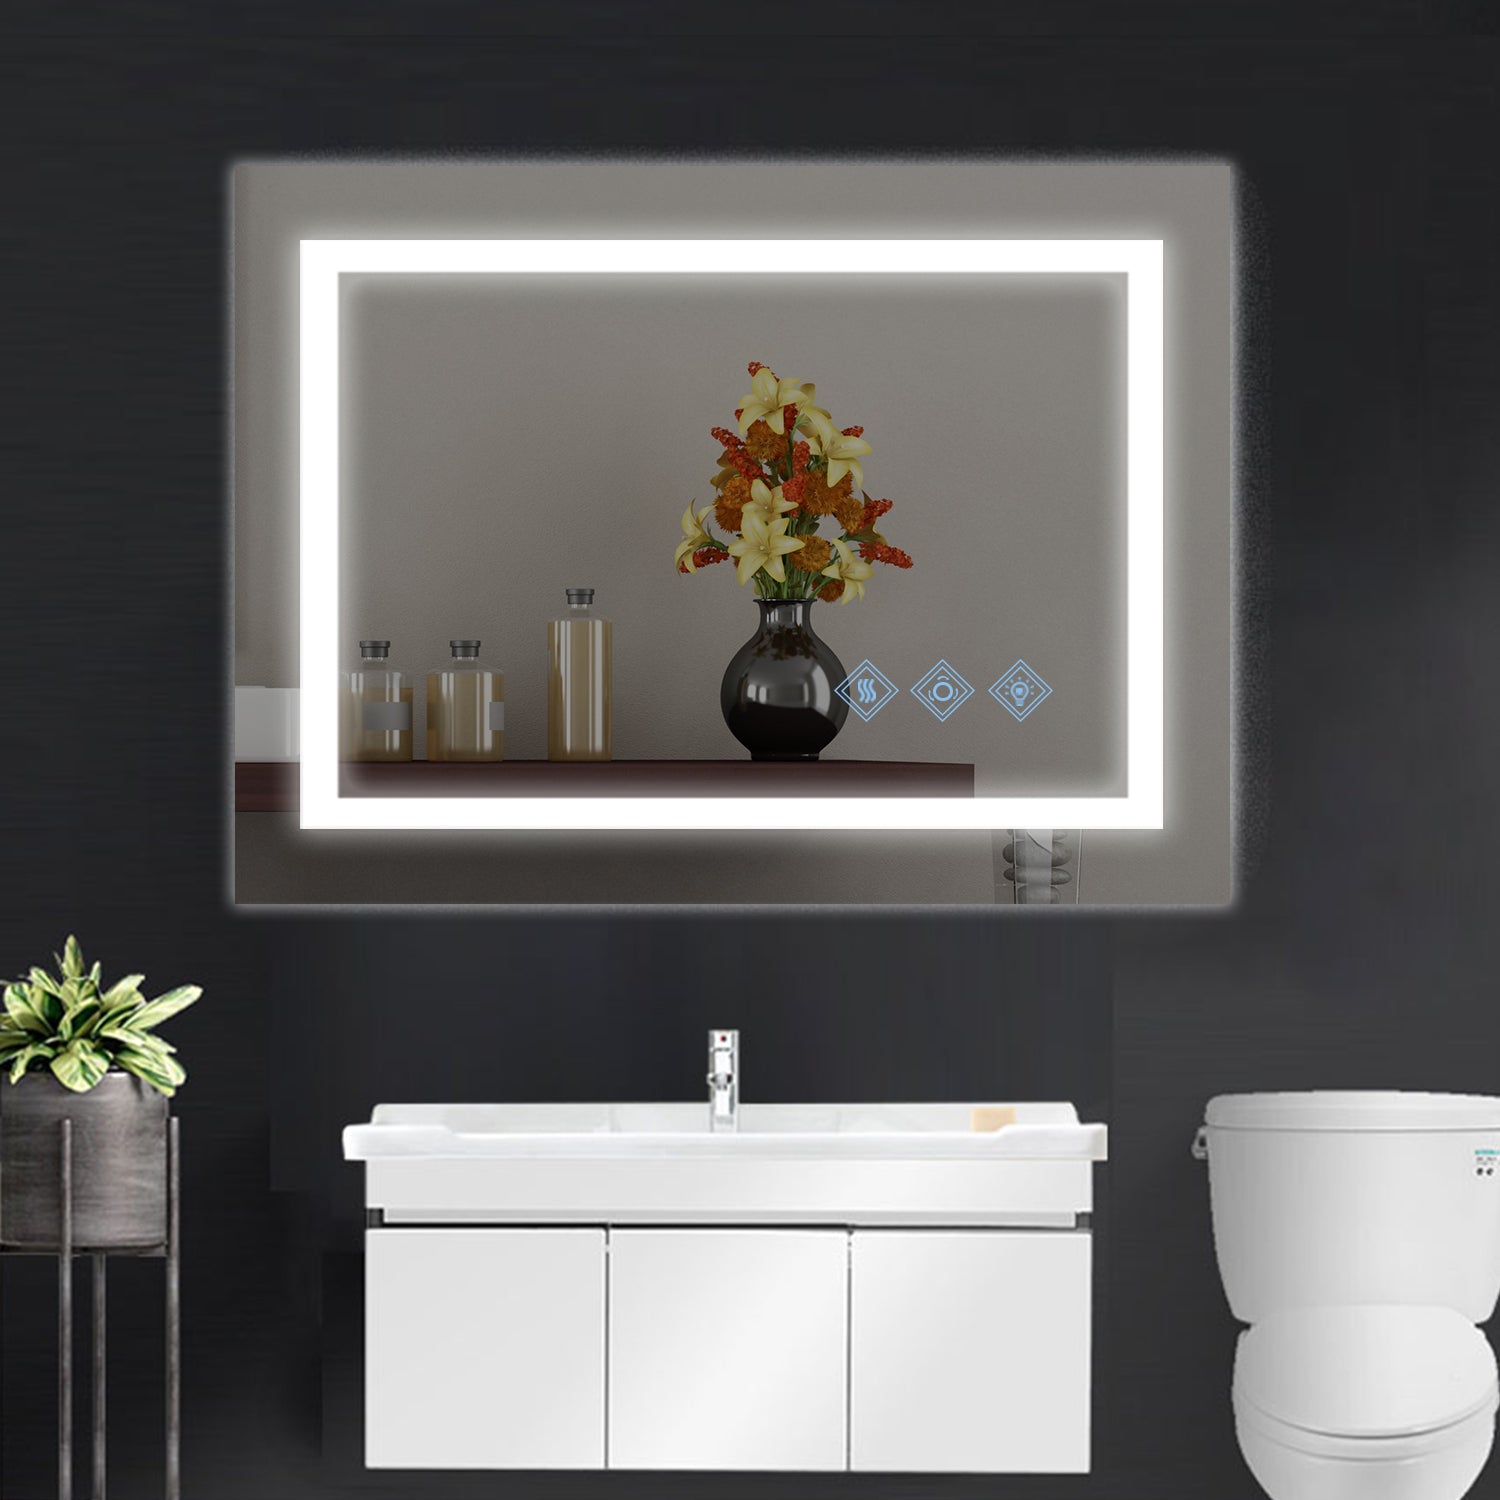 35'' x 28'' Modern Wall Mounted Bathroom Storage Cabinet, Bathroom Wall Cabinet with Mirror, Medicine Cabinet with Towels Bar